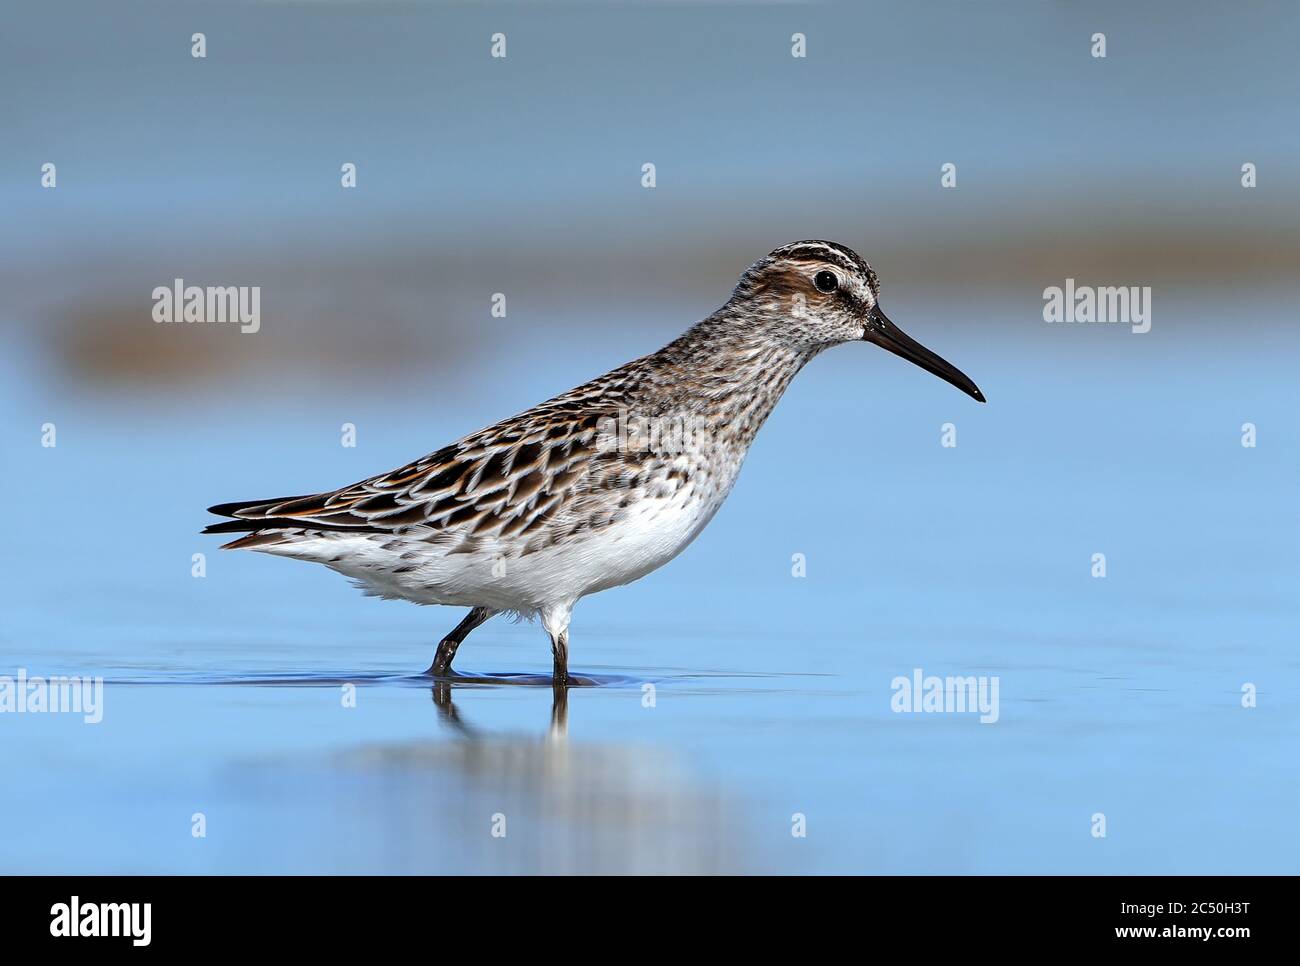 broad-billed sandpiper (Calidris falcinellus, Limicola falcinellus), Adult Broad-billed Sandpiper standing in shallow water, France, Hyeres Stock Photo